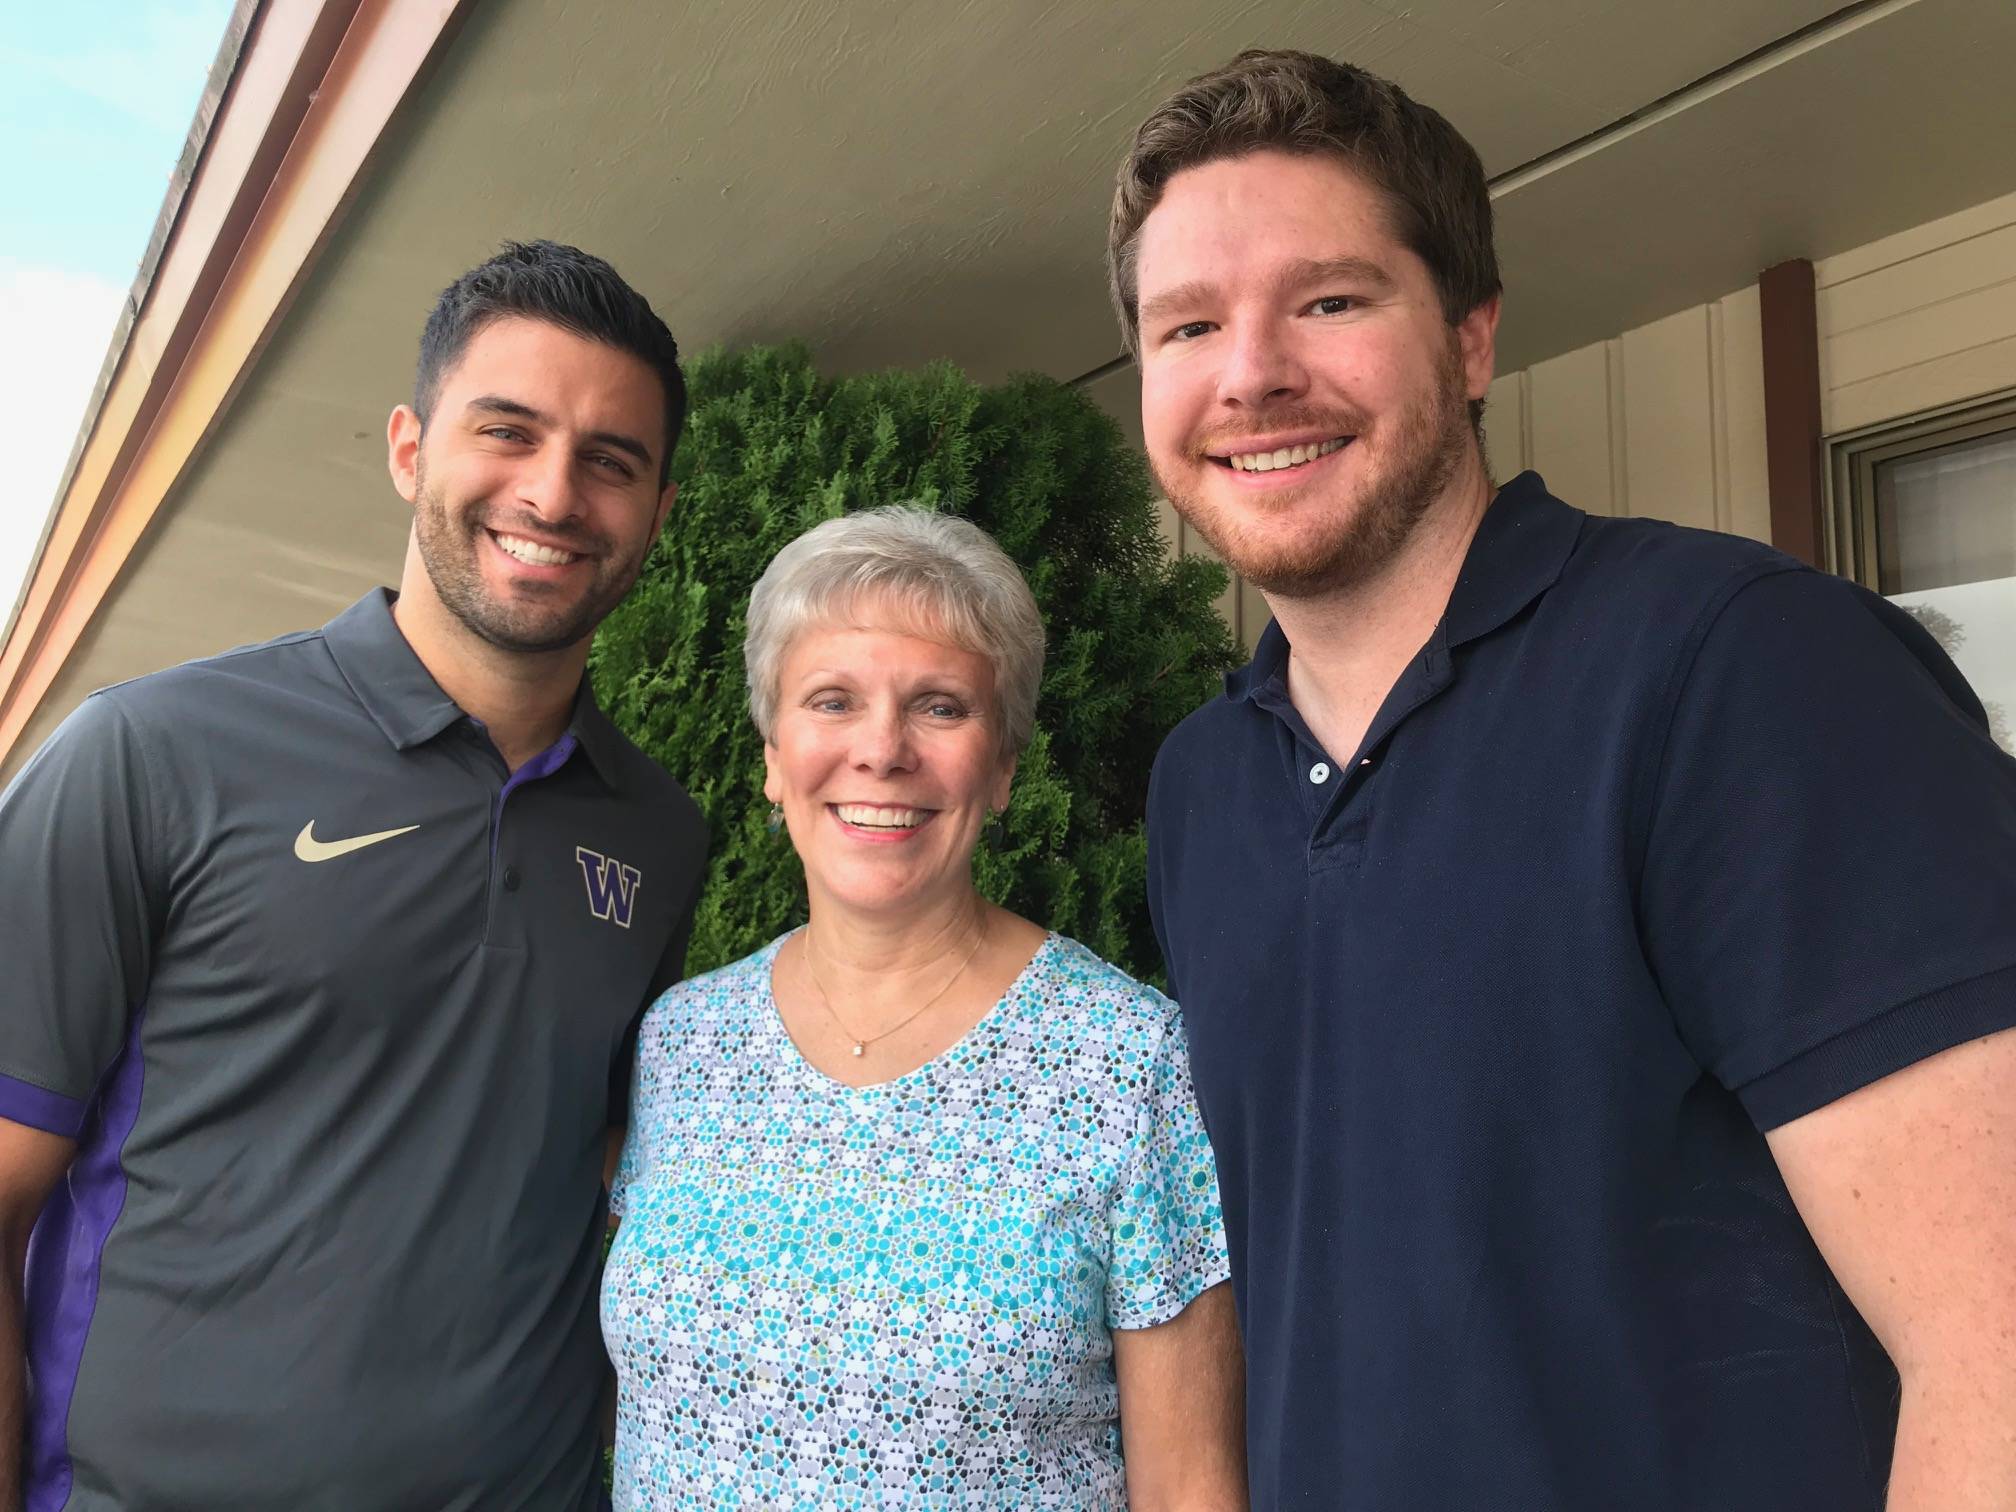 After 40 years of dentistry, Dr. Sue Hollinsworth is retiring, passing on her practice to Drs. Kooroush Mansourzadeh, left, and Brent Spencer. MARK KLAAS, Kent Reporter